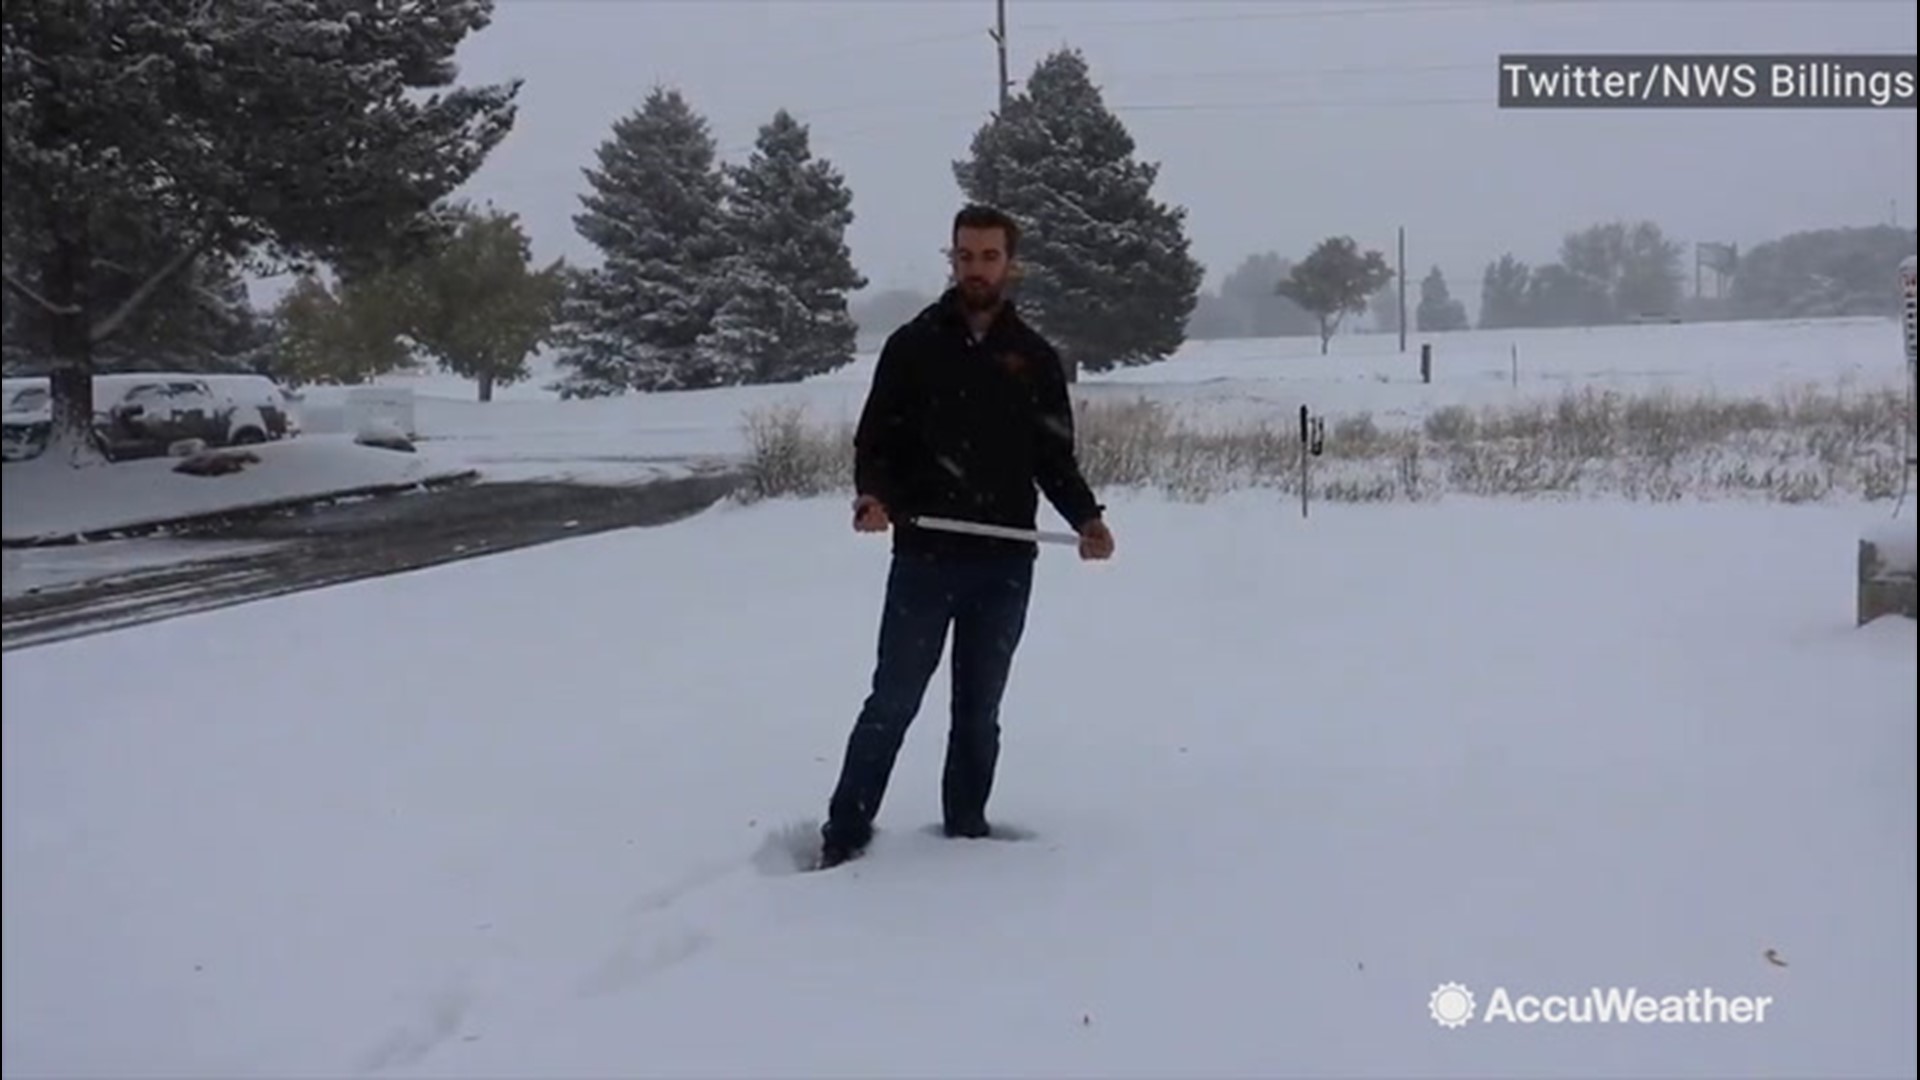 A meteorologist from the National Weather Service in Billings, Montana, posted to social media about how they measure snowfall amounts on Oct. 9.